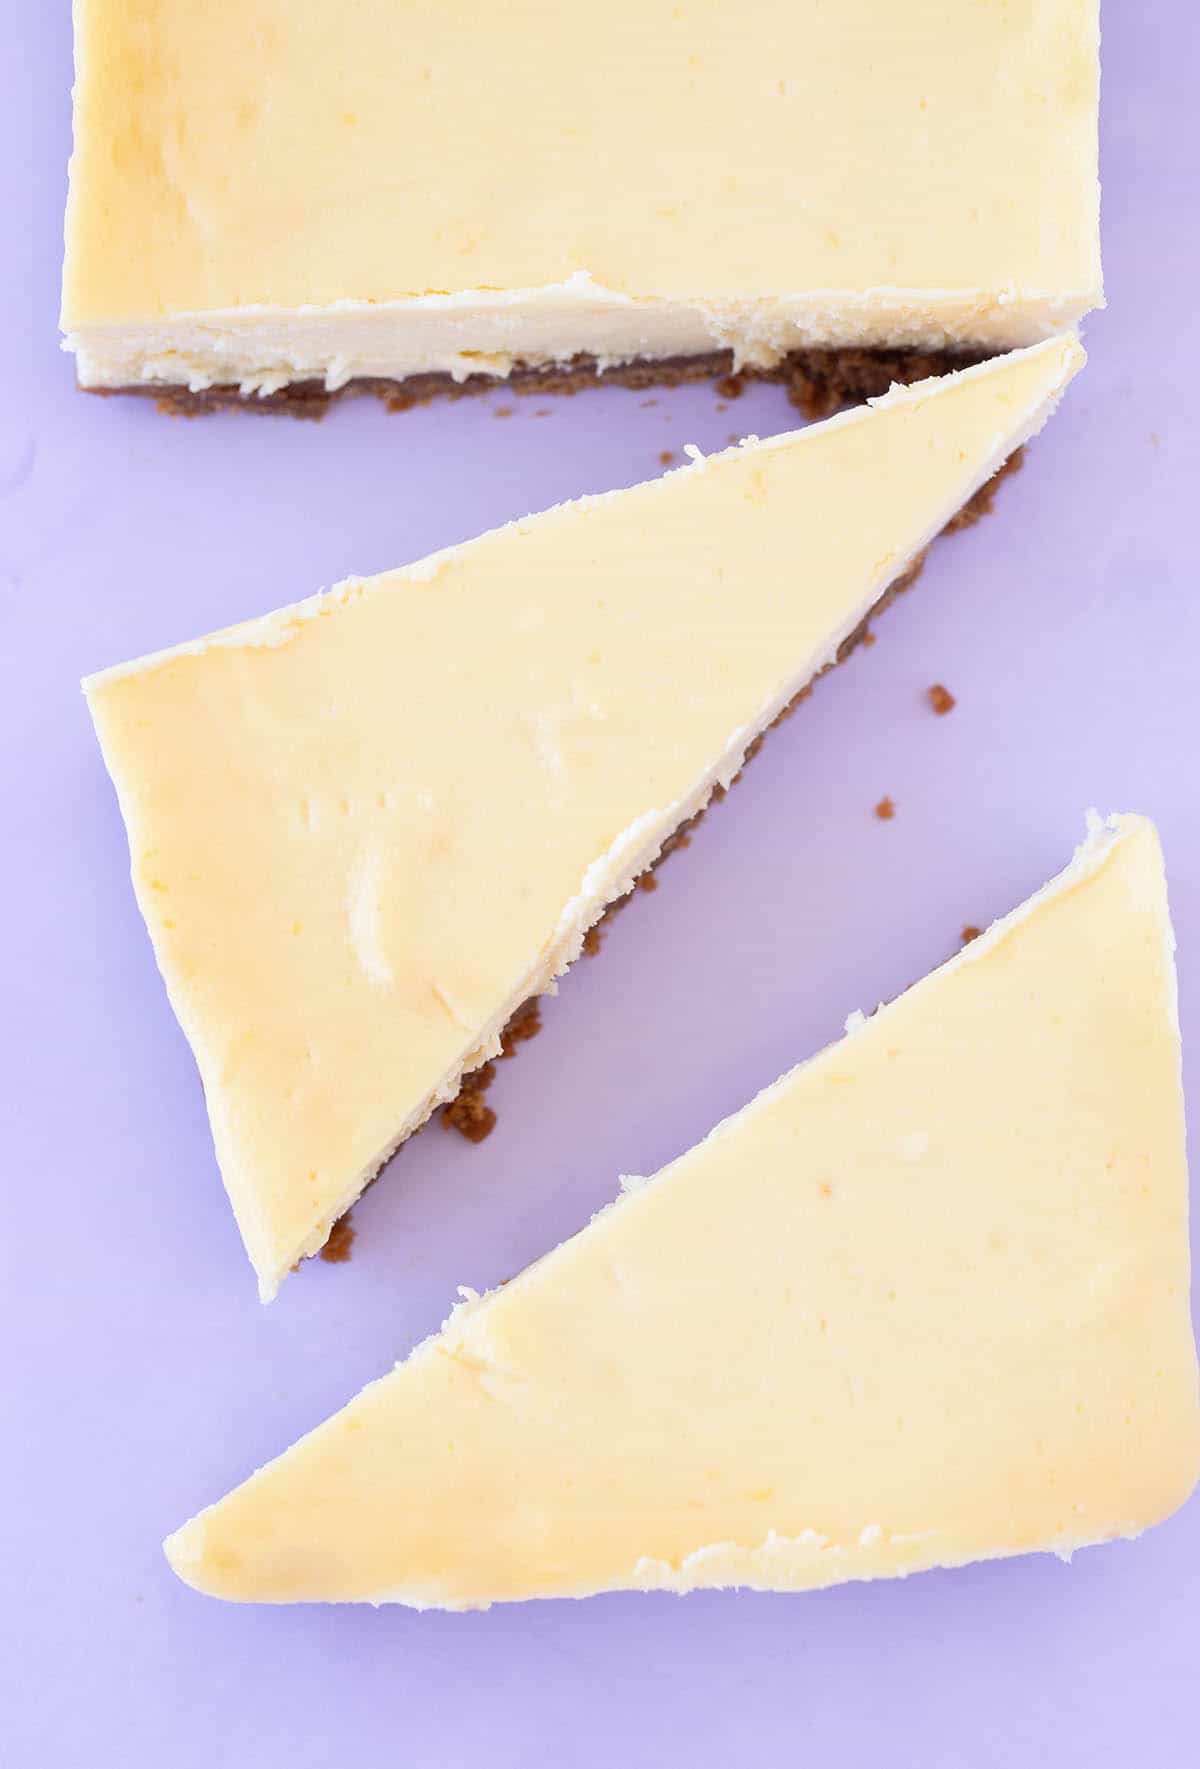 Top view of slices of cheesecake on a purple background 